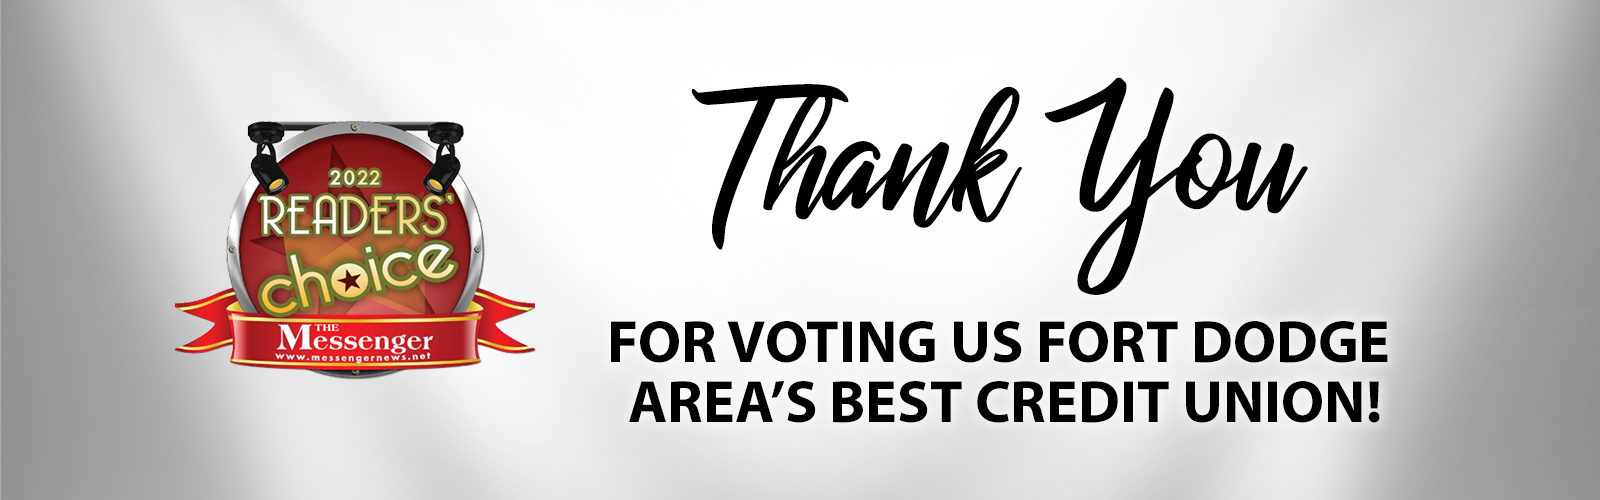 Thank you for voting us Fort Dodge area's best credit union!